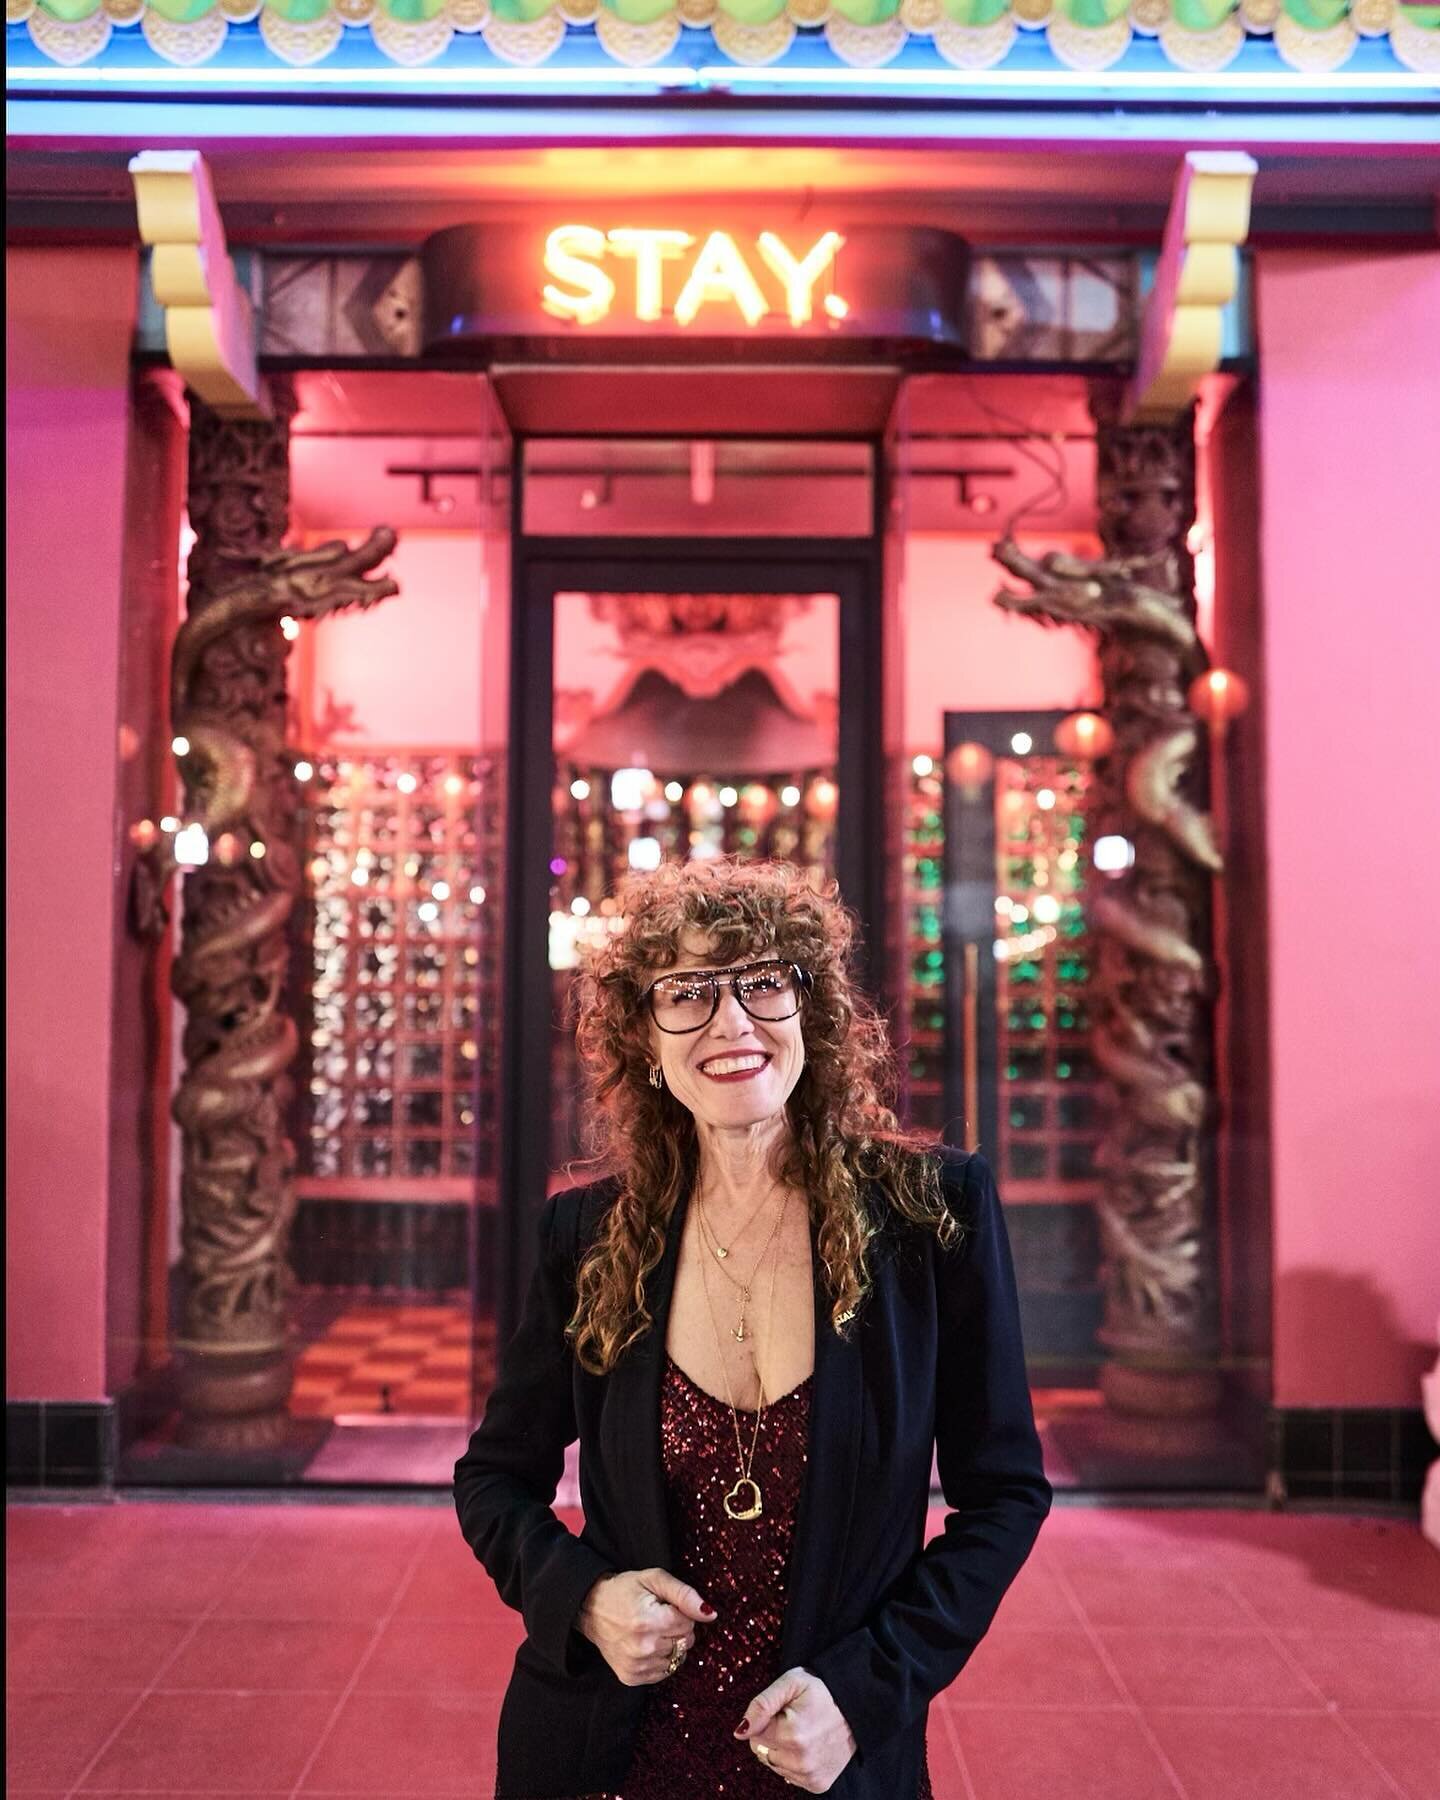 STAY. GRATEFUL
&nbsp;
In celebration of Co-Owner Stacey&rsquo;s 37-year sober anniversary today, we will be partying on 
Thursday 2/8, 
5:00pm to midnight! 
Stacey got sober in 1987, the year of the rabbit. 
She will personally be donating money to @